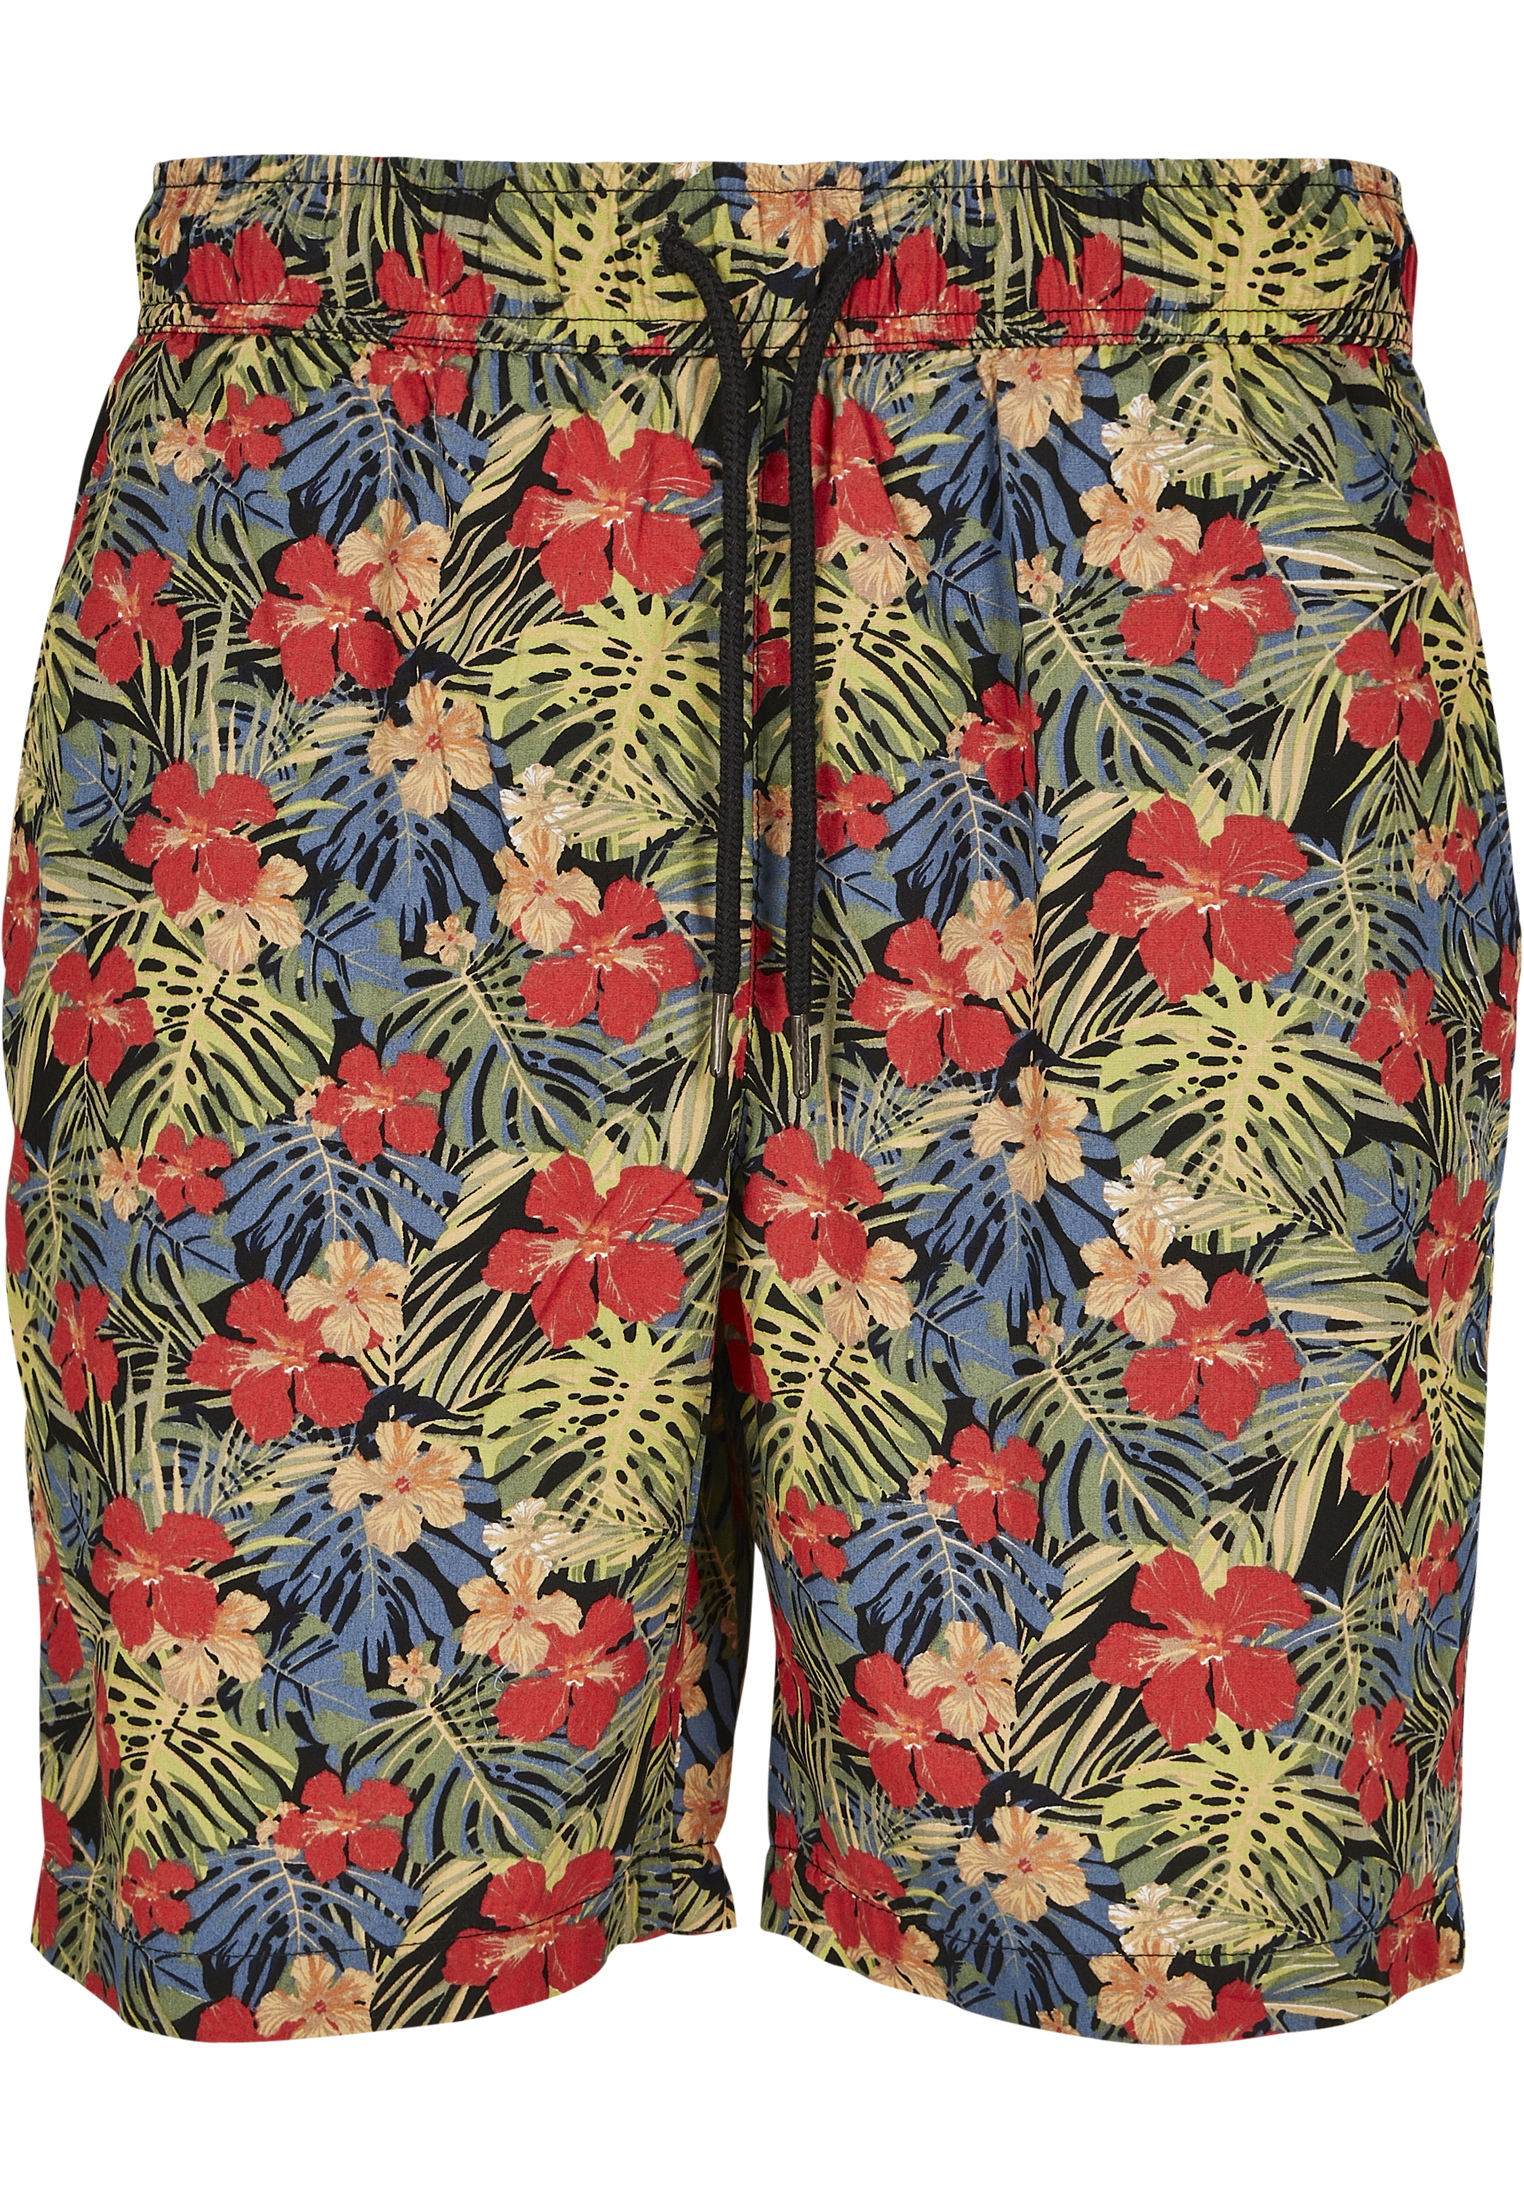 Plus Size Pattern Resort Shorts in Farbe black/tropical